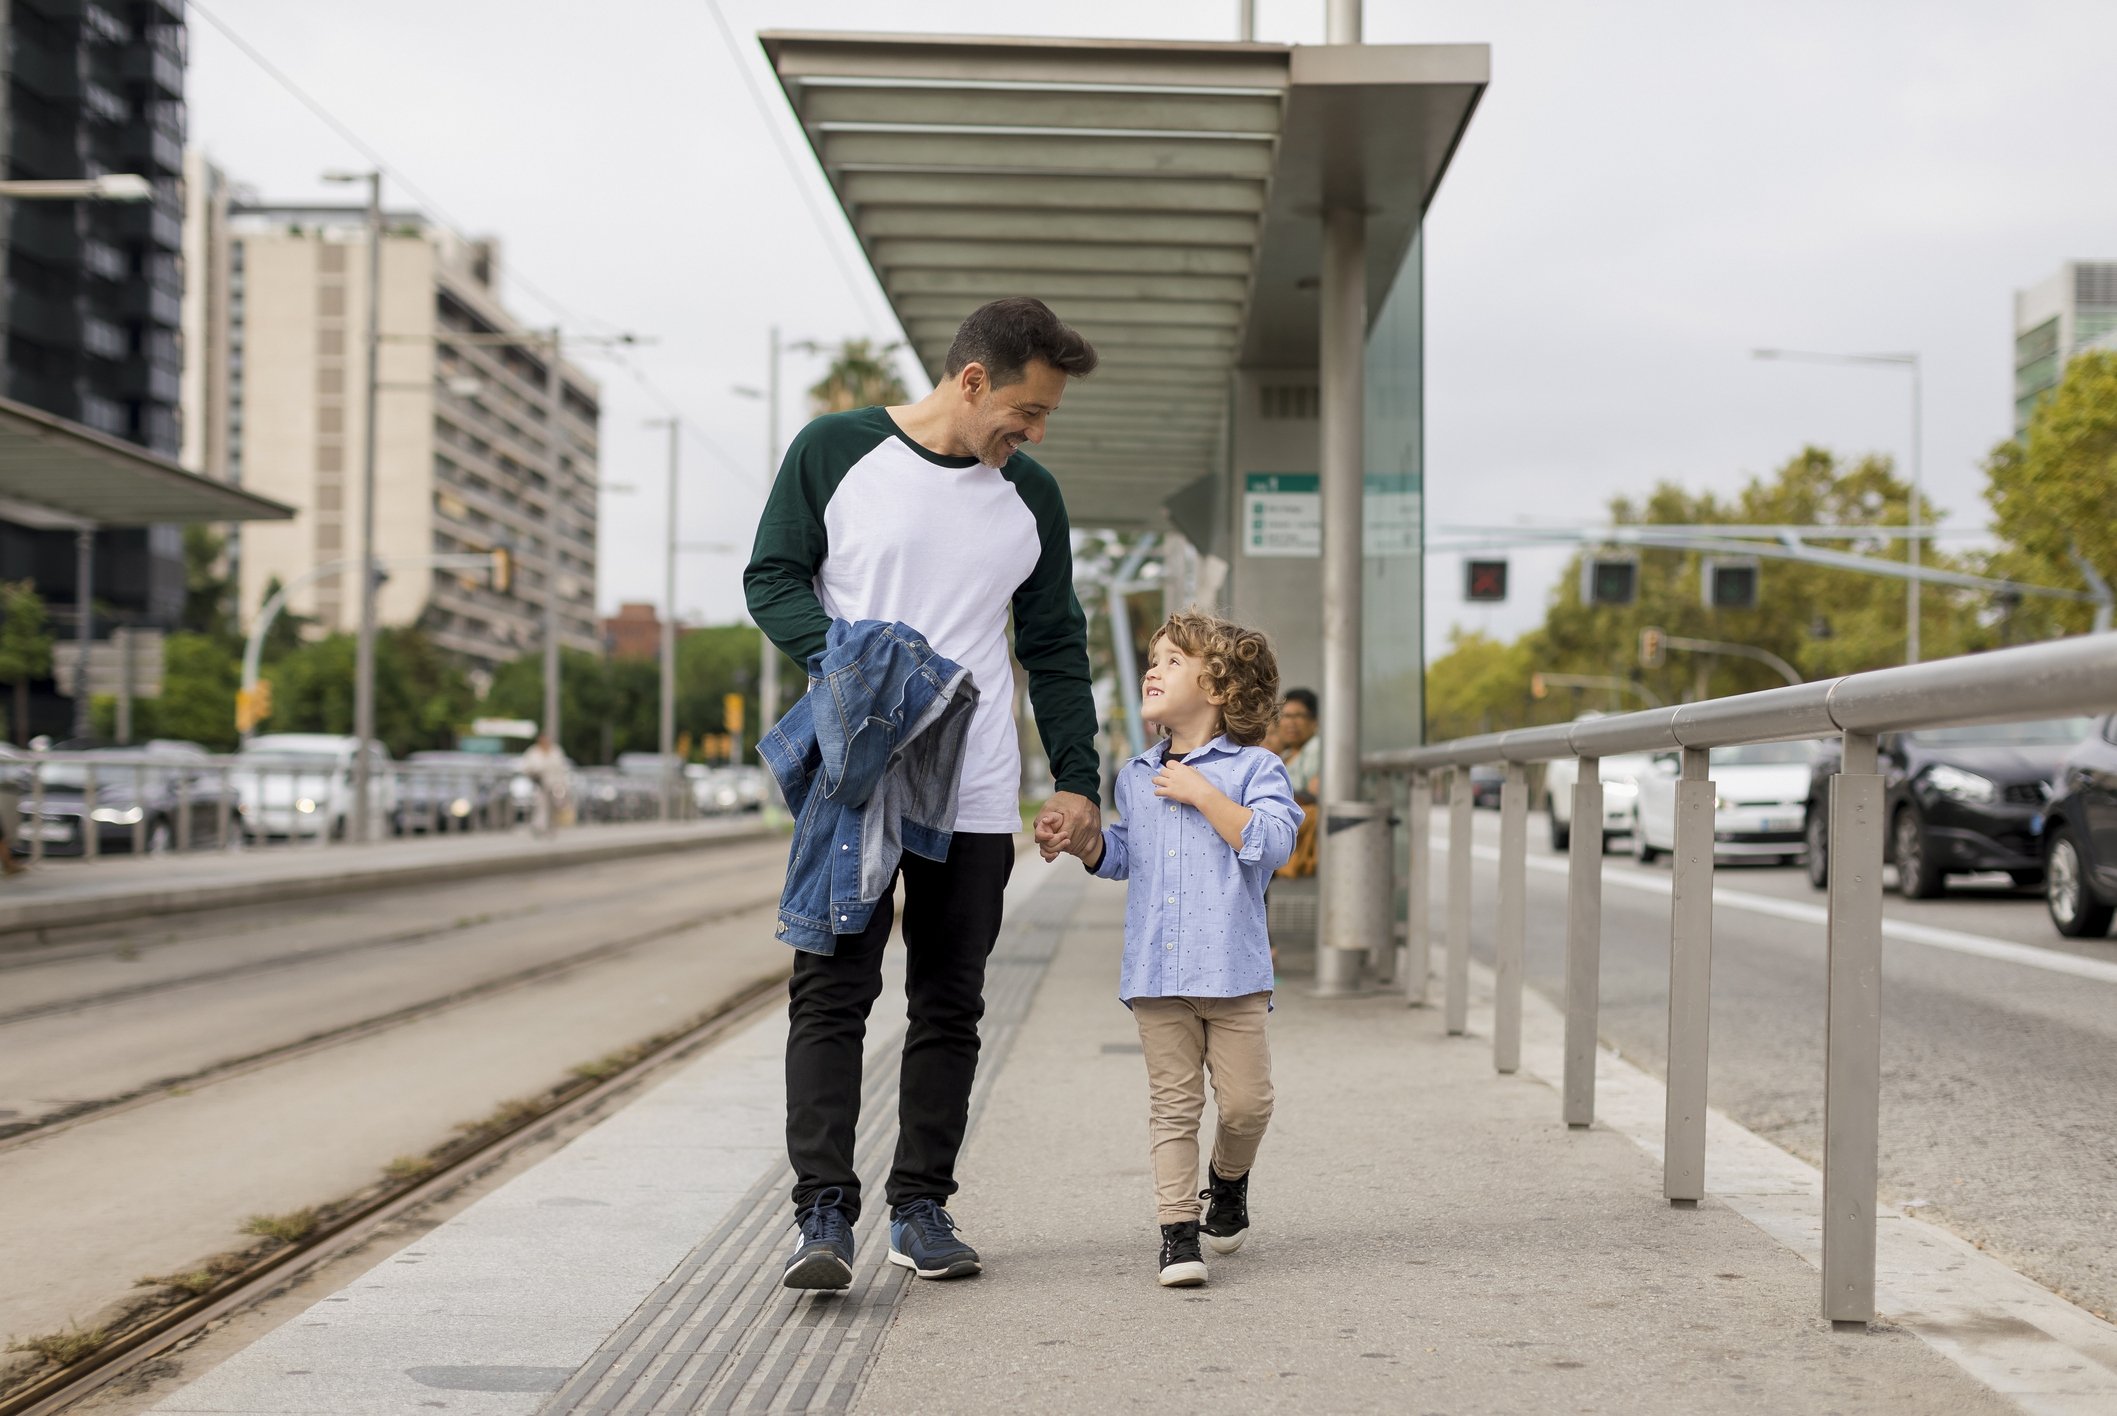              Smiling father and son walking hand in hand at tram stop in the city : Stock Photo   Buy the print   Comp   Smiling father and son walking hand in hand at tram stop in the city  | Photo: Getty Images